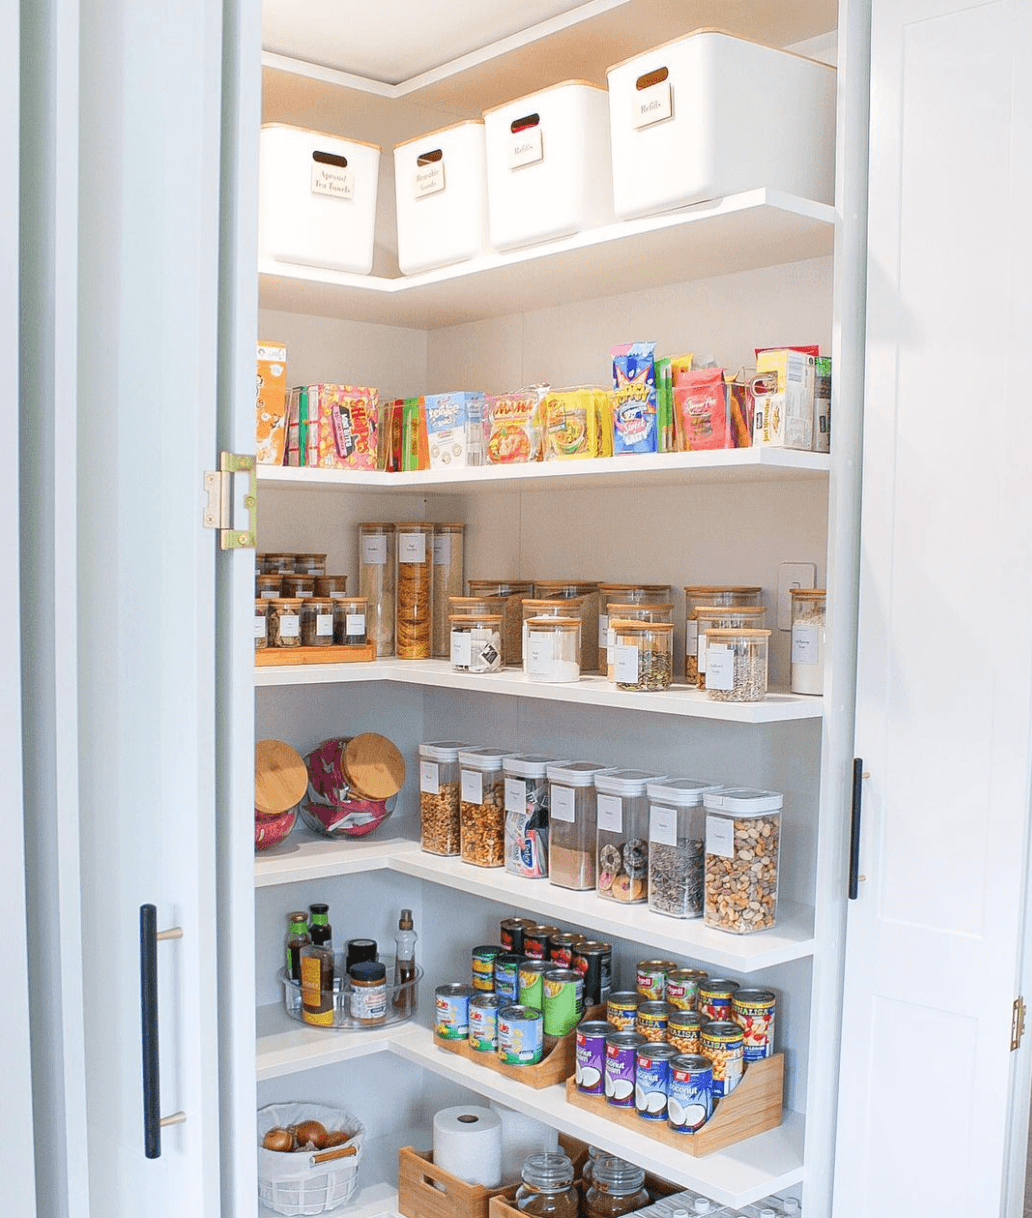 These 10 Kitchen Storage Ideas Will Make Your Life So Much Easier - Little Label Co